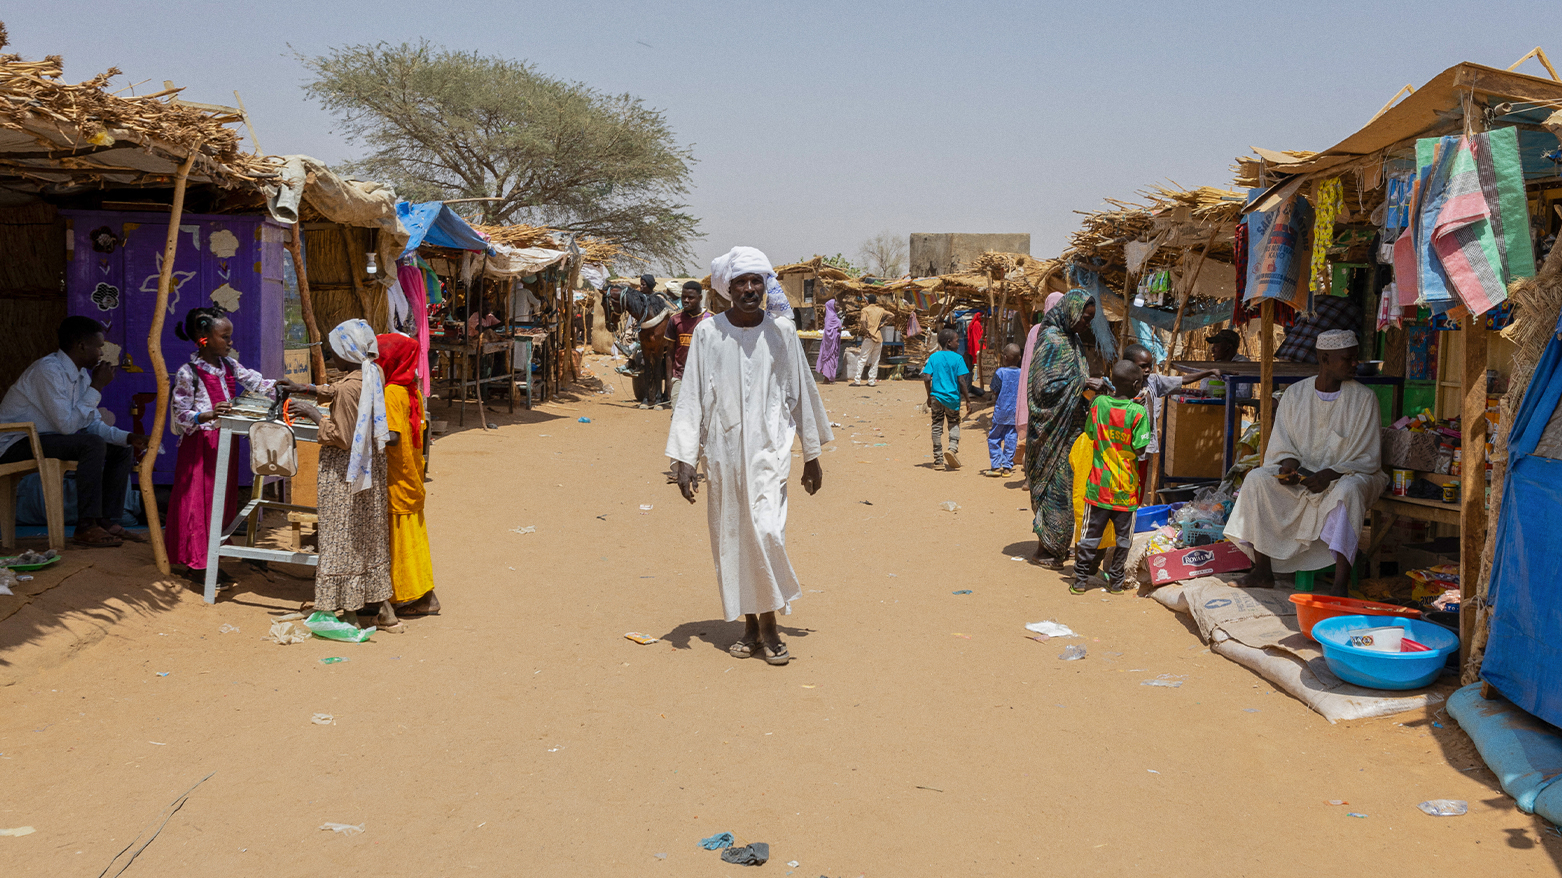 Sudanese disheartened as war enters second year